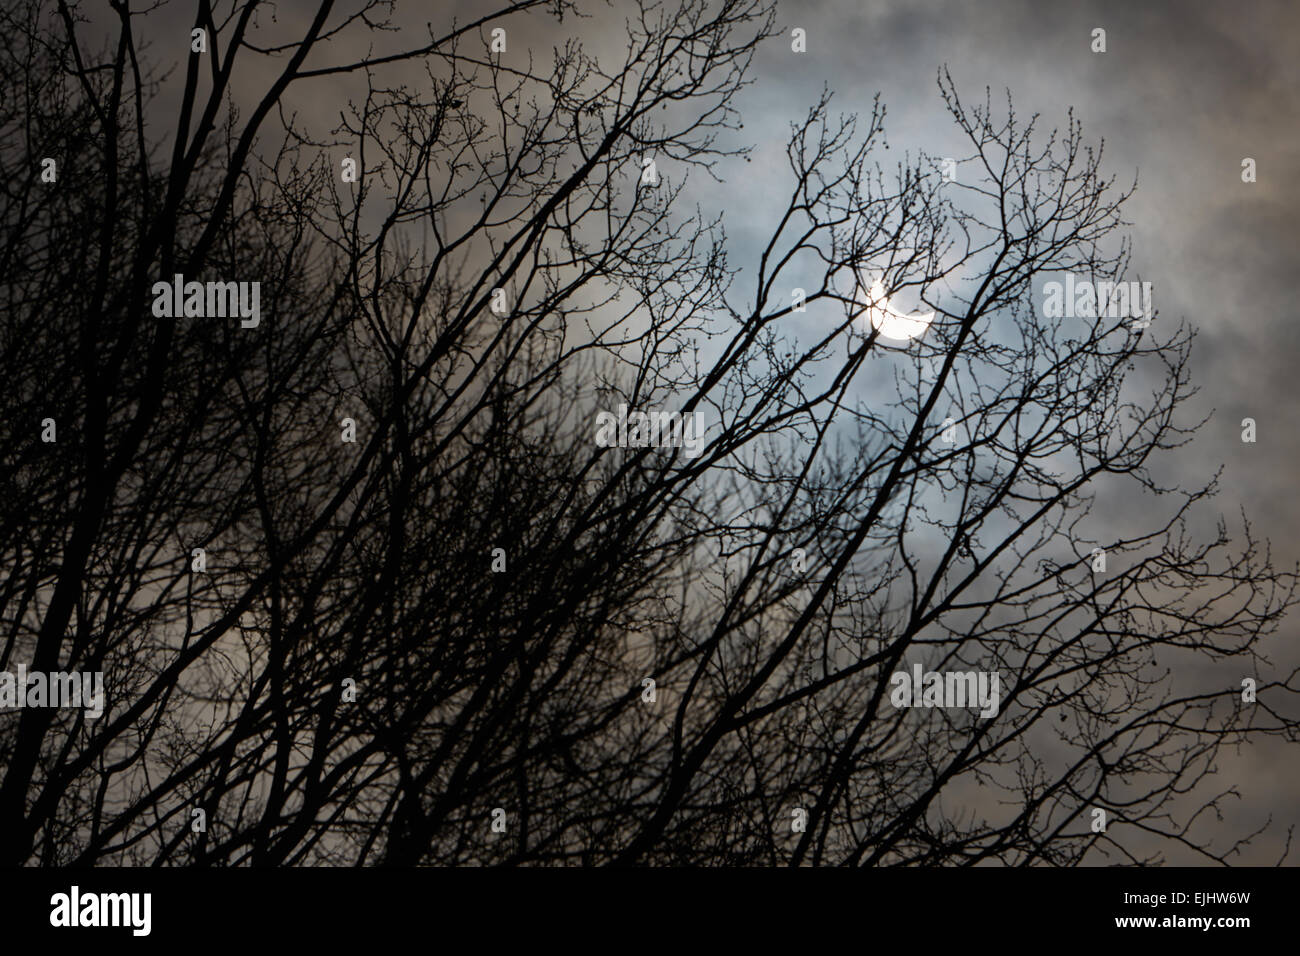 Solar eclipse and winter tree branches with cloudy sky, dark and mystery Stock Photo